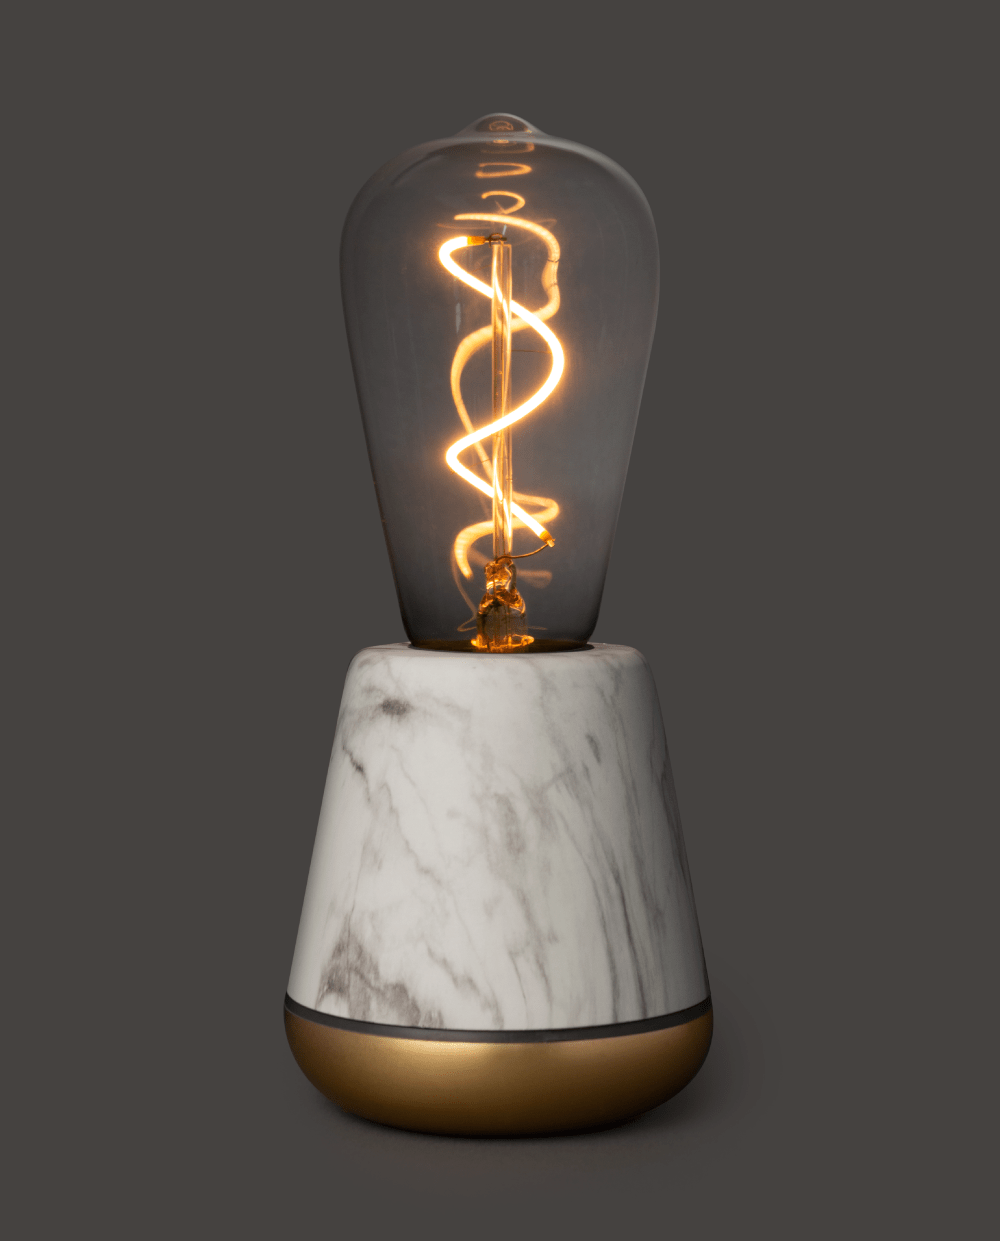 Humble One Light - White Marble - Satin Brass